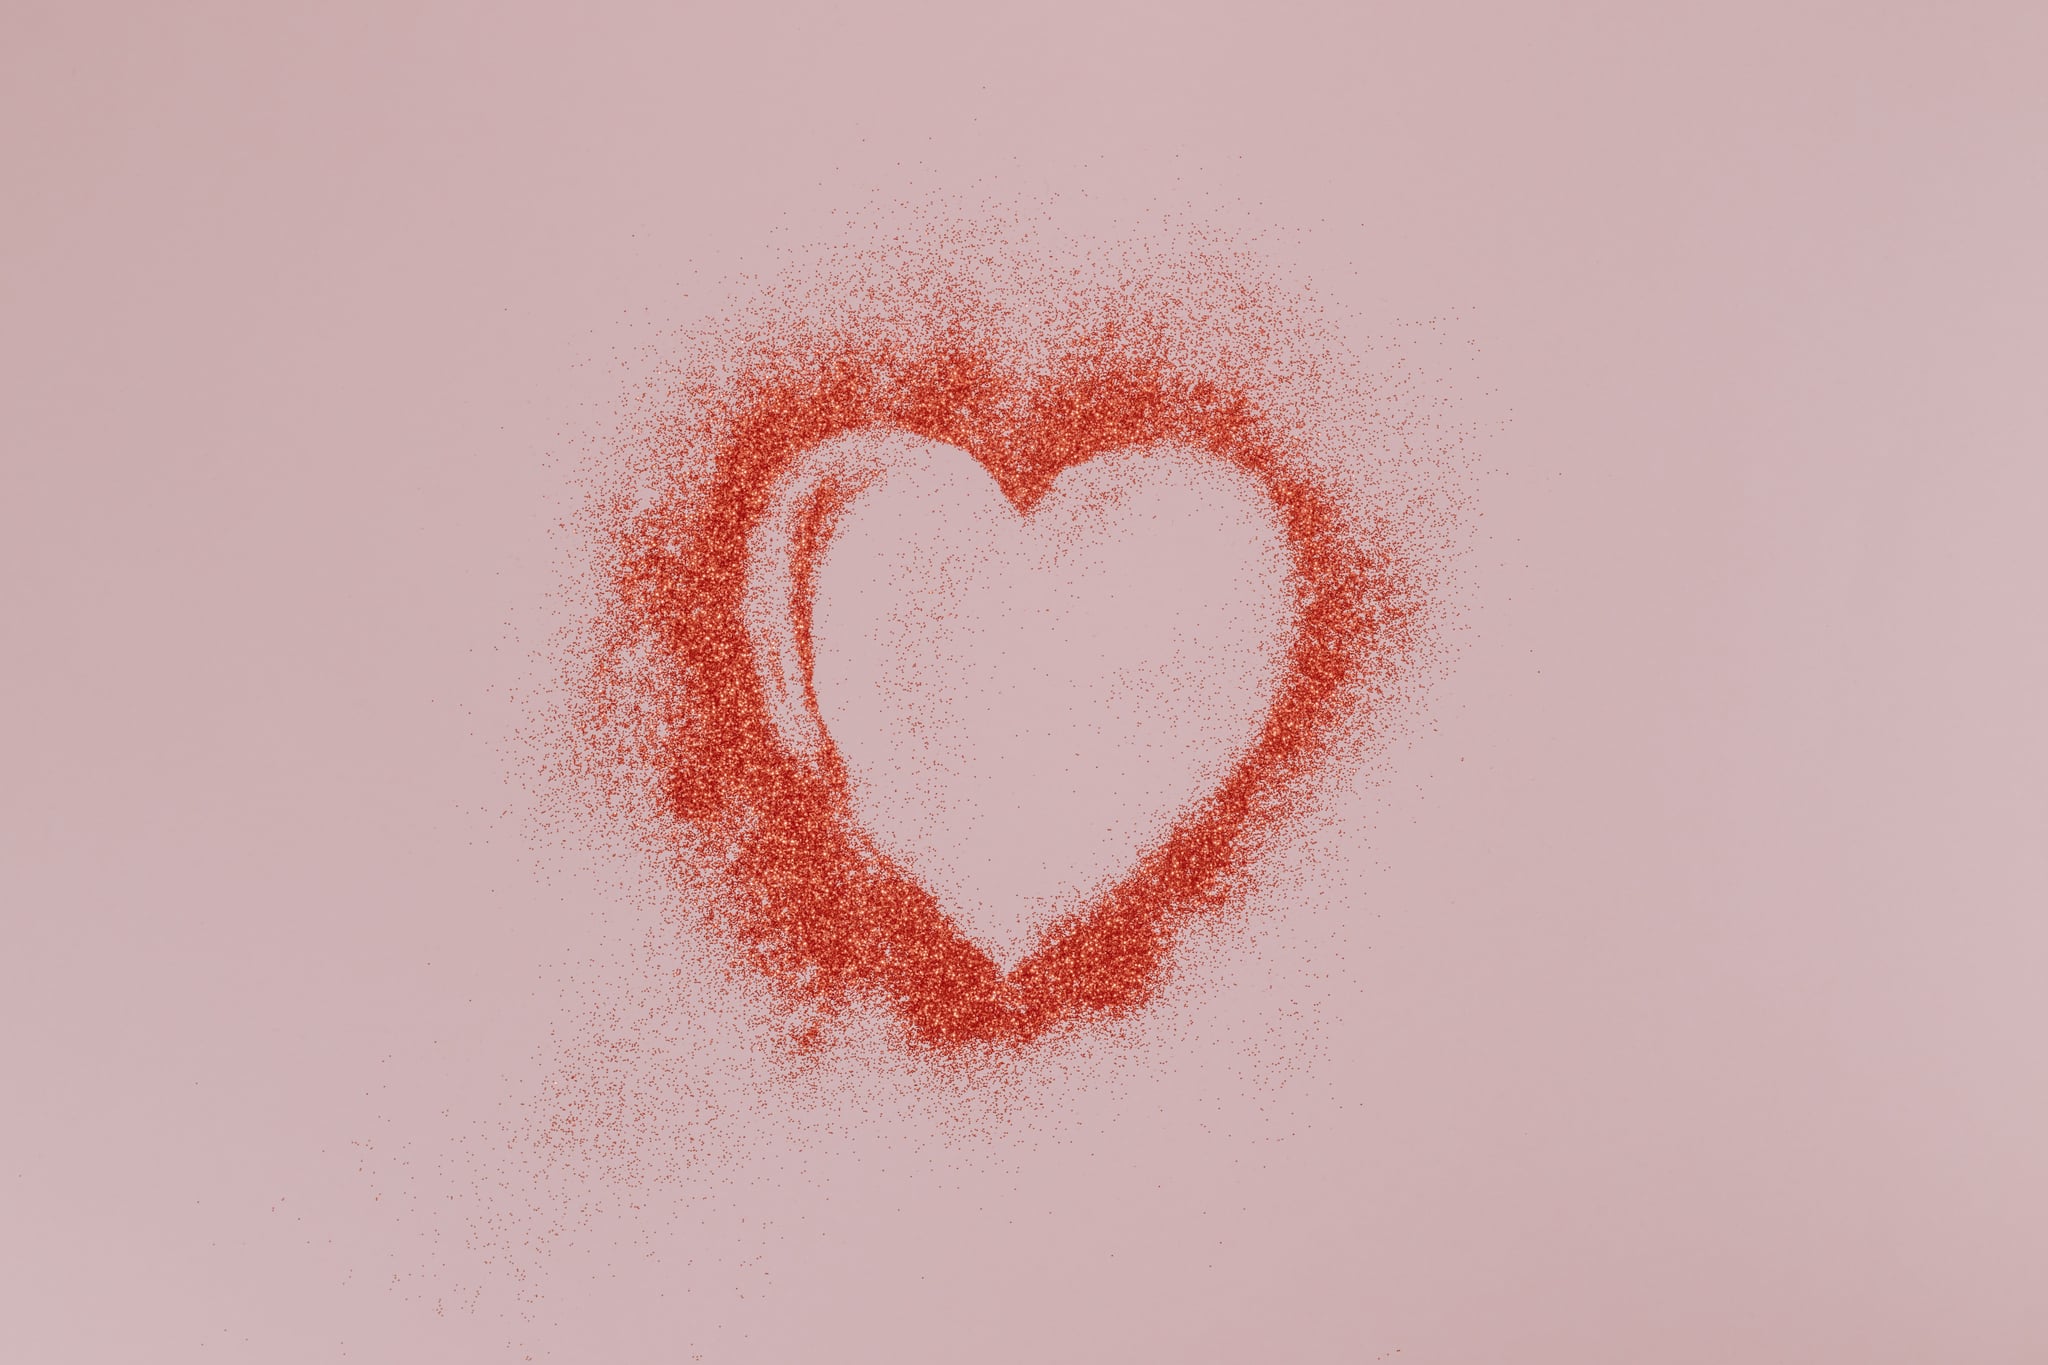 Valentine's Day Zoom Background: Glitter Heart. Share the Love This Valentine's Day With These 50 Zoom Background Image